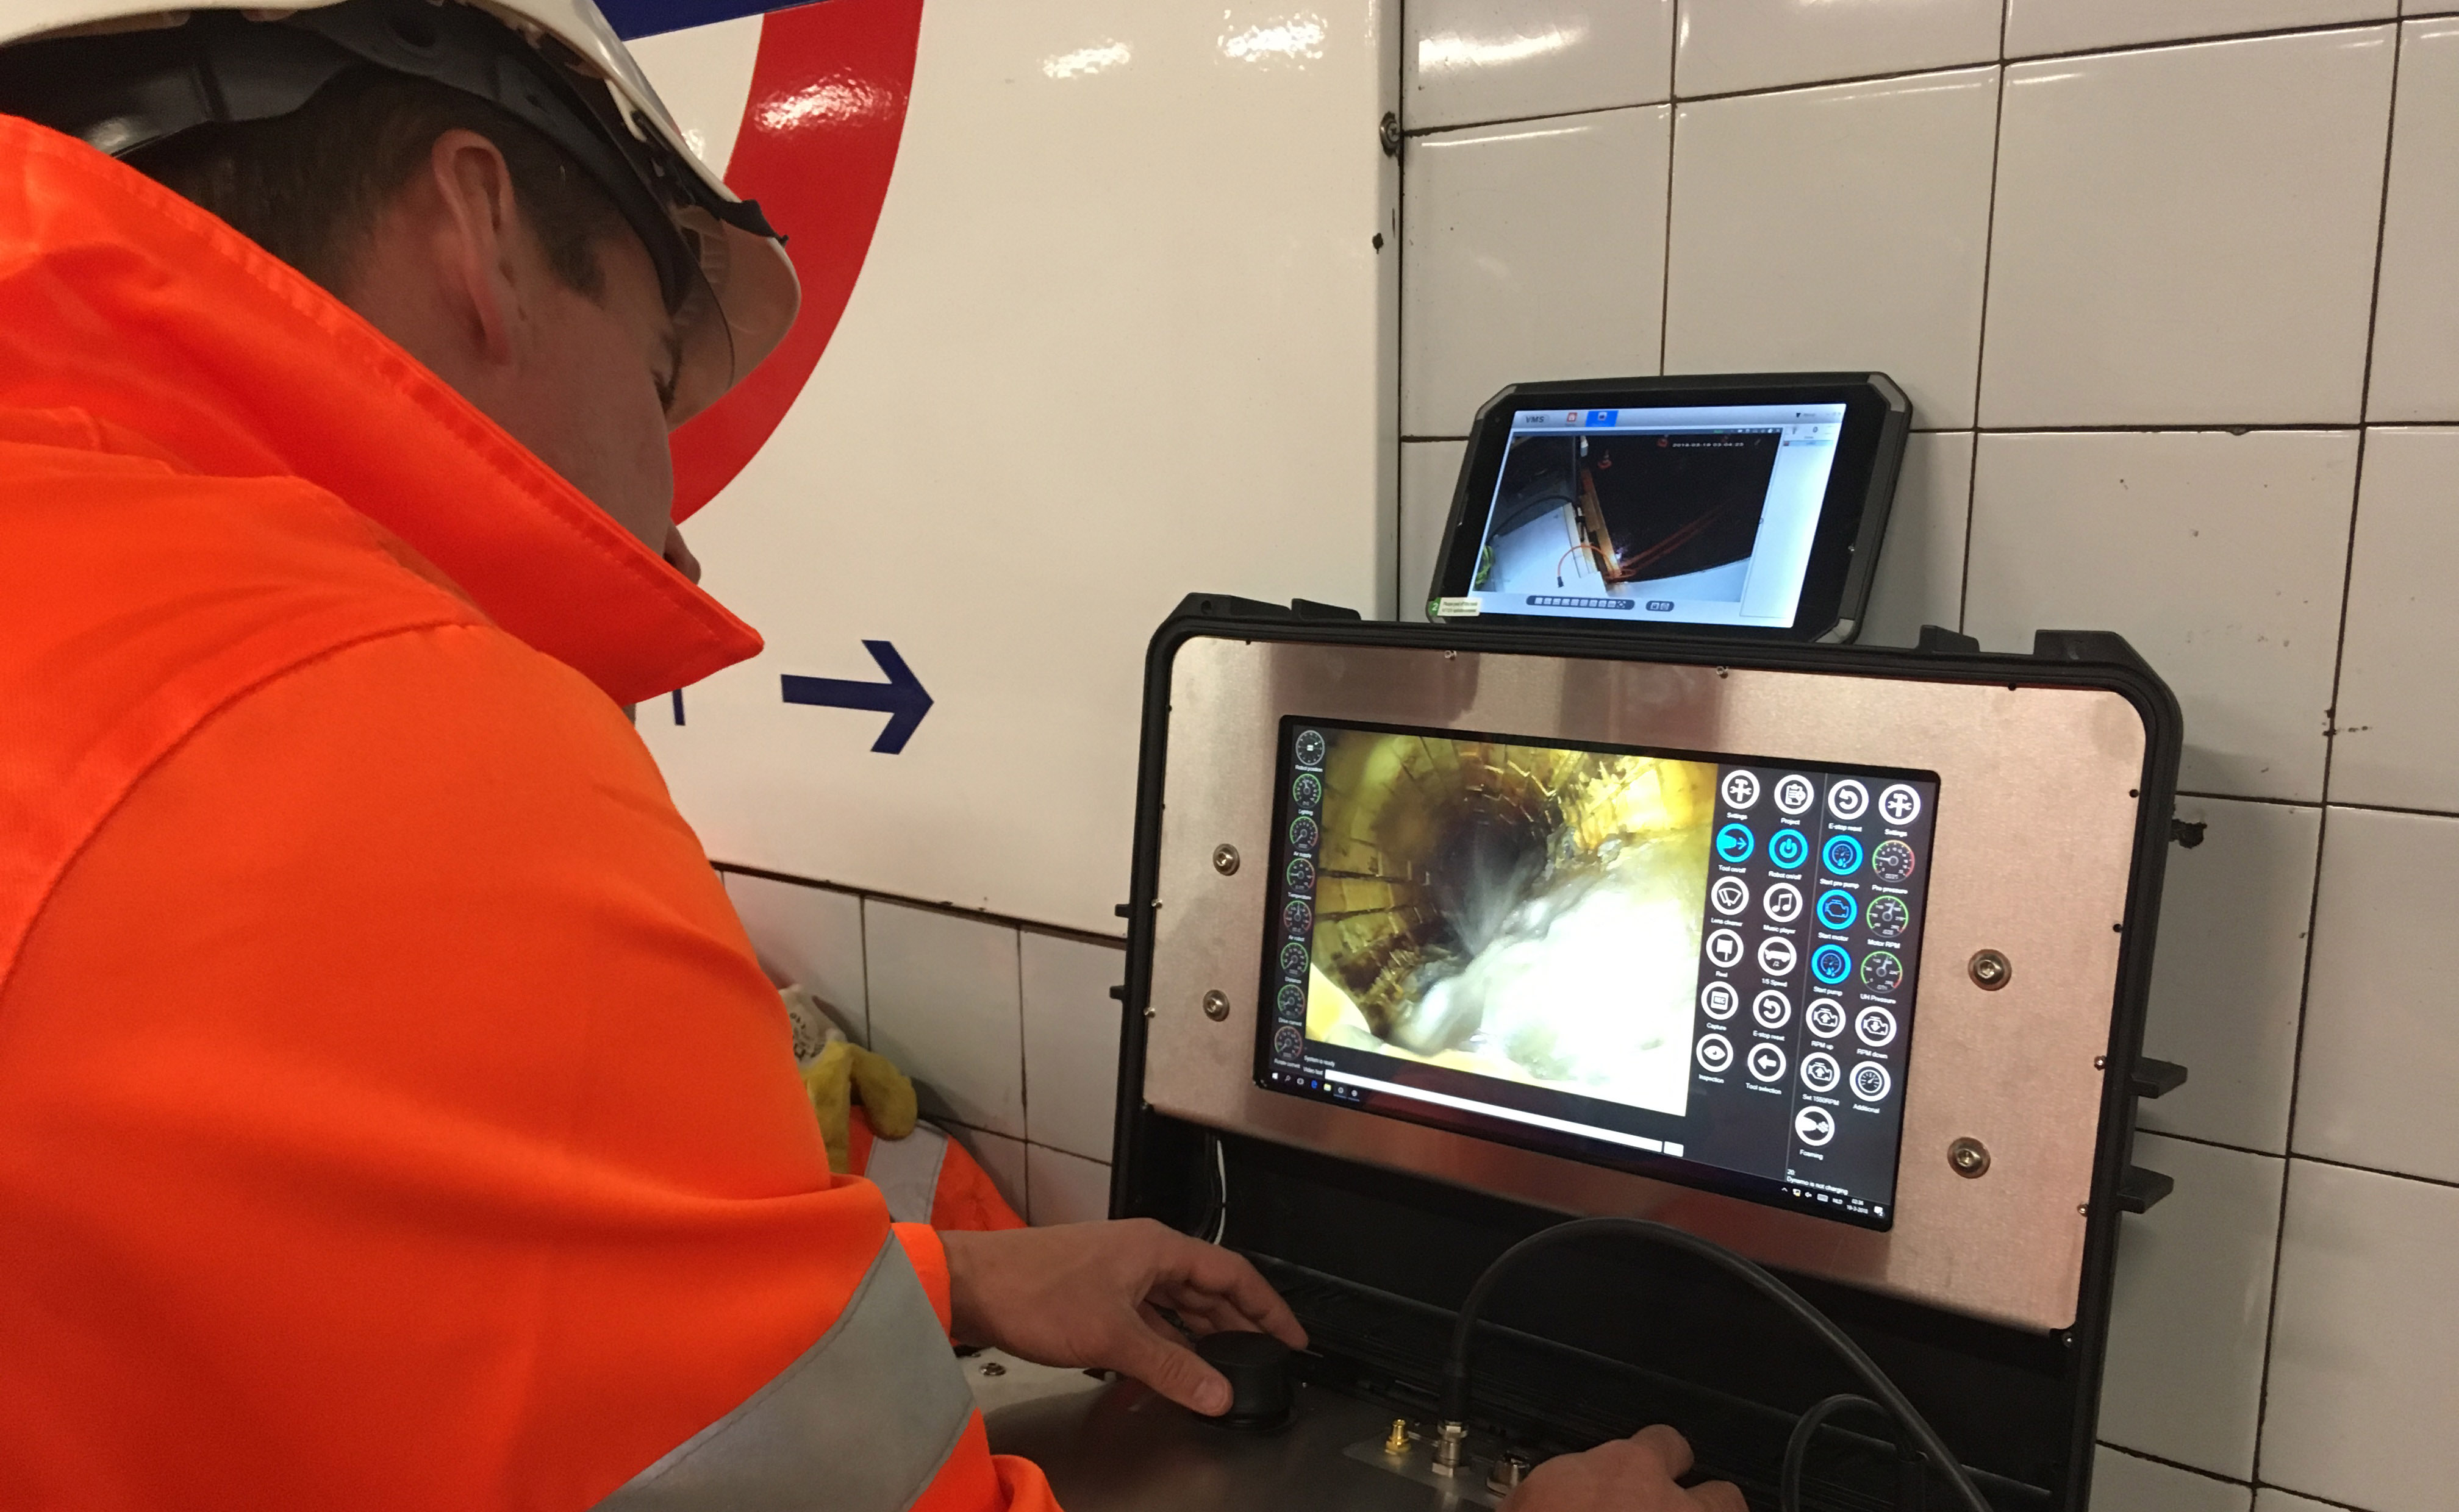 Sewer Robotics mobile control unit used for removing concrete from london underground